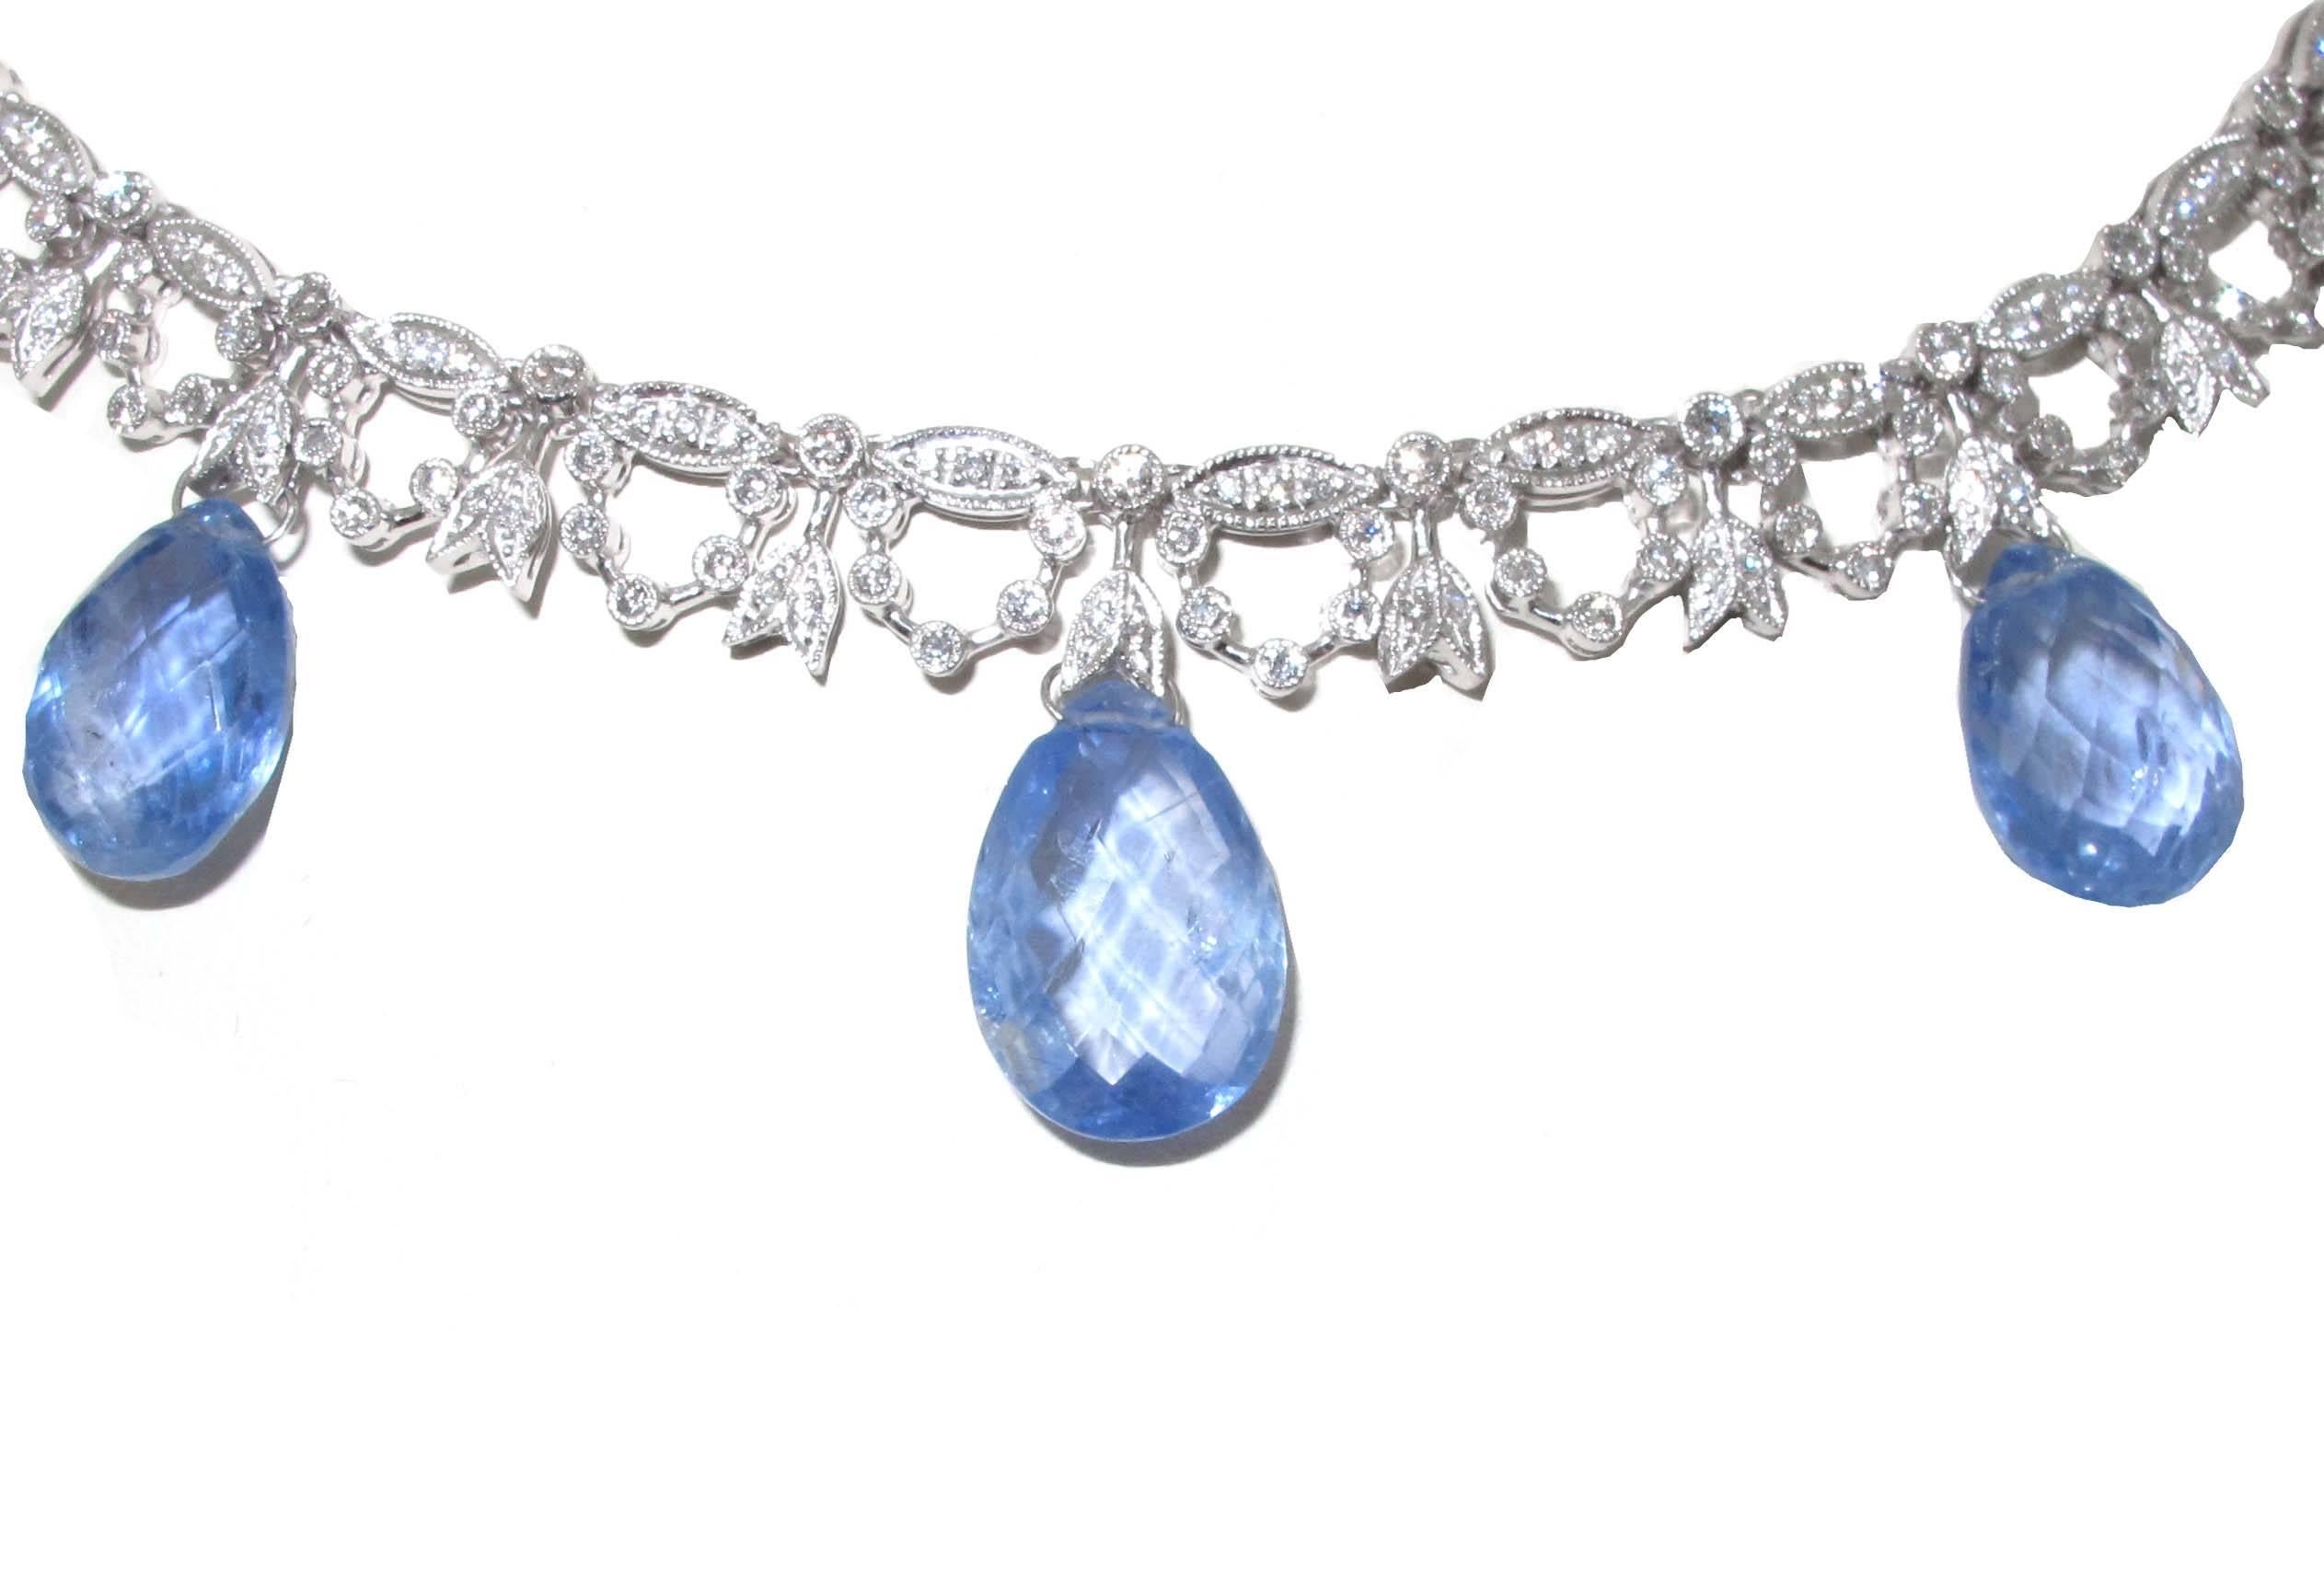 Such a fantastically delicate platinum set Briloette cut pear shape sapphire necklace. On the base of the necklace is white diamonds of great quality. The necklace will fit a standard neck. Our favorite part of this necklace is how the light bounces